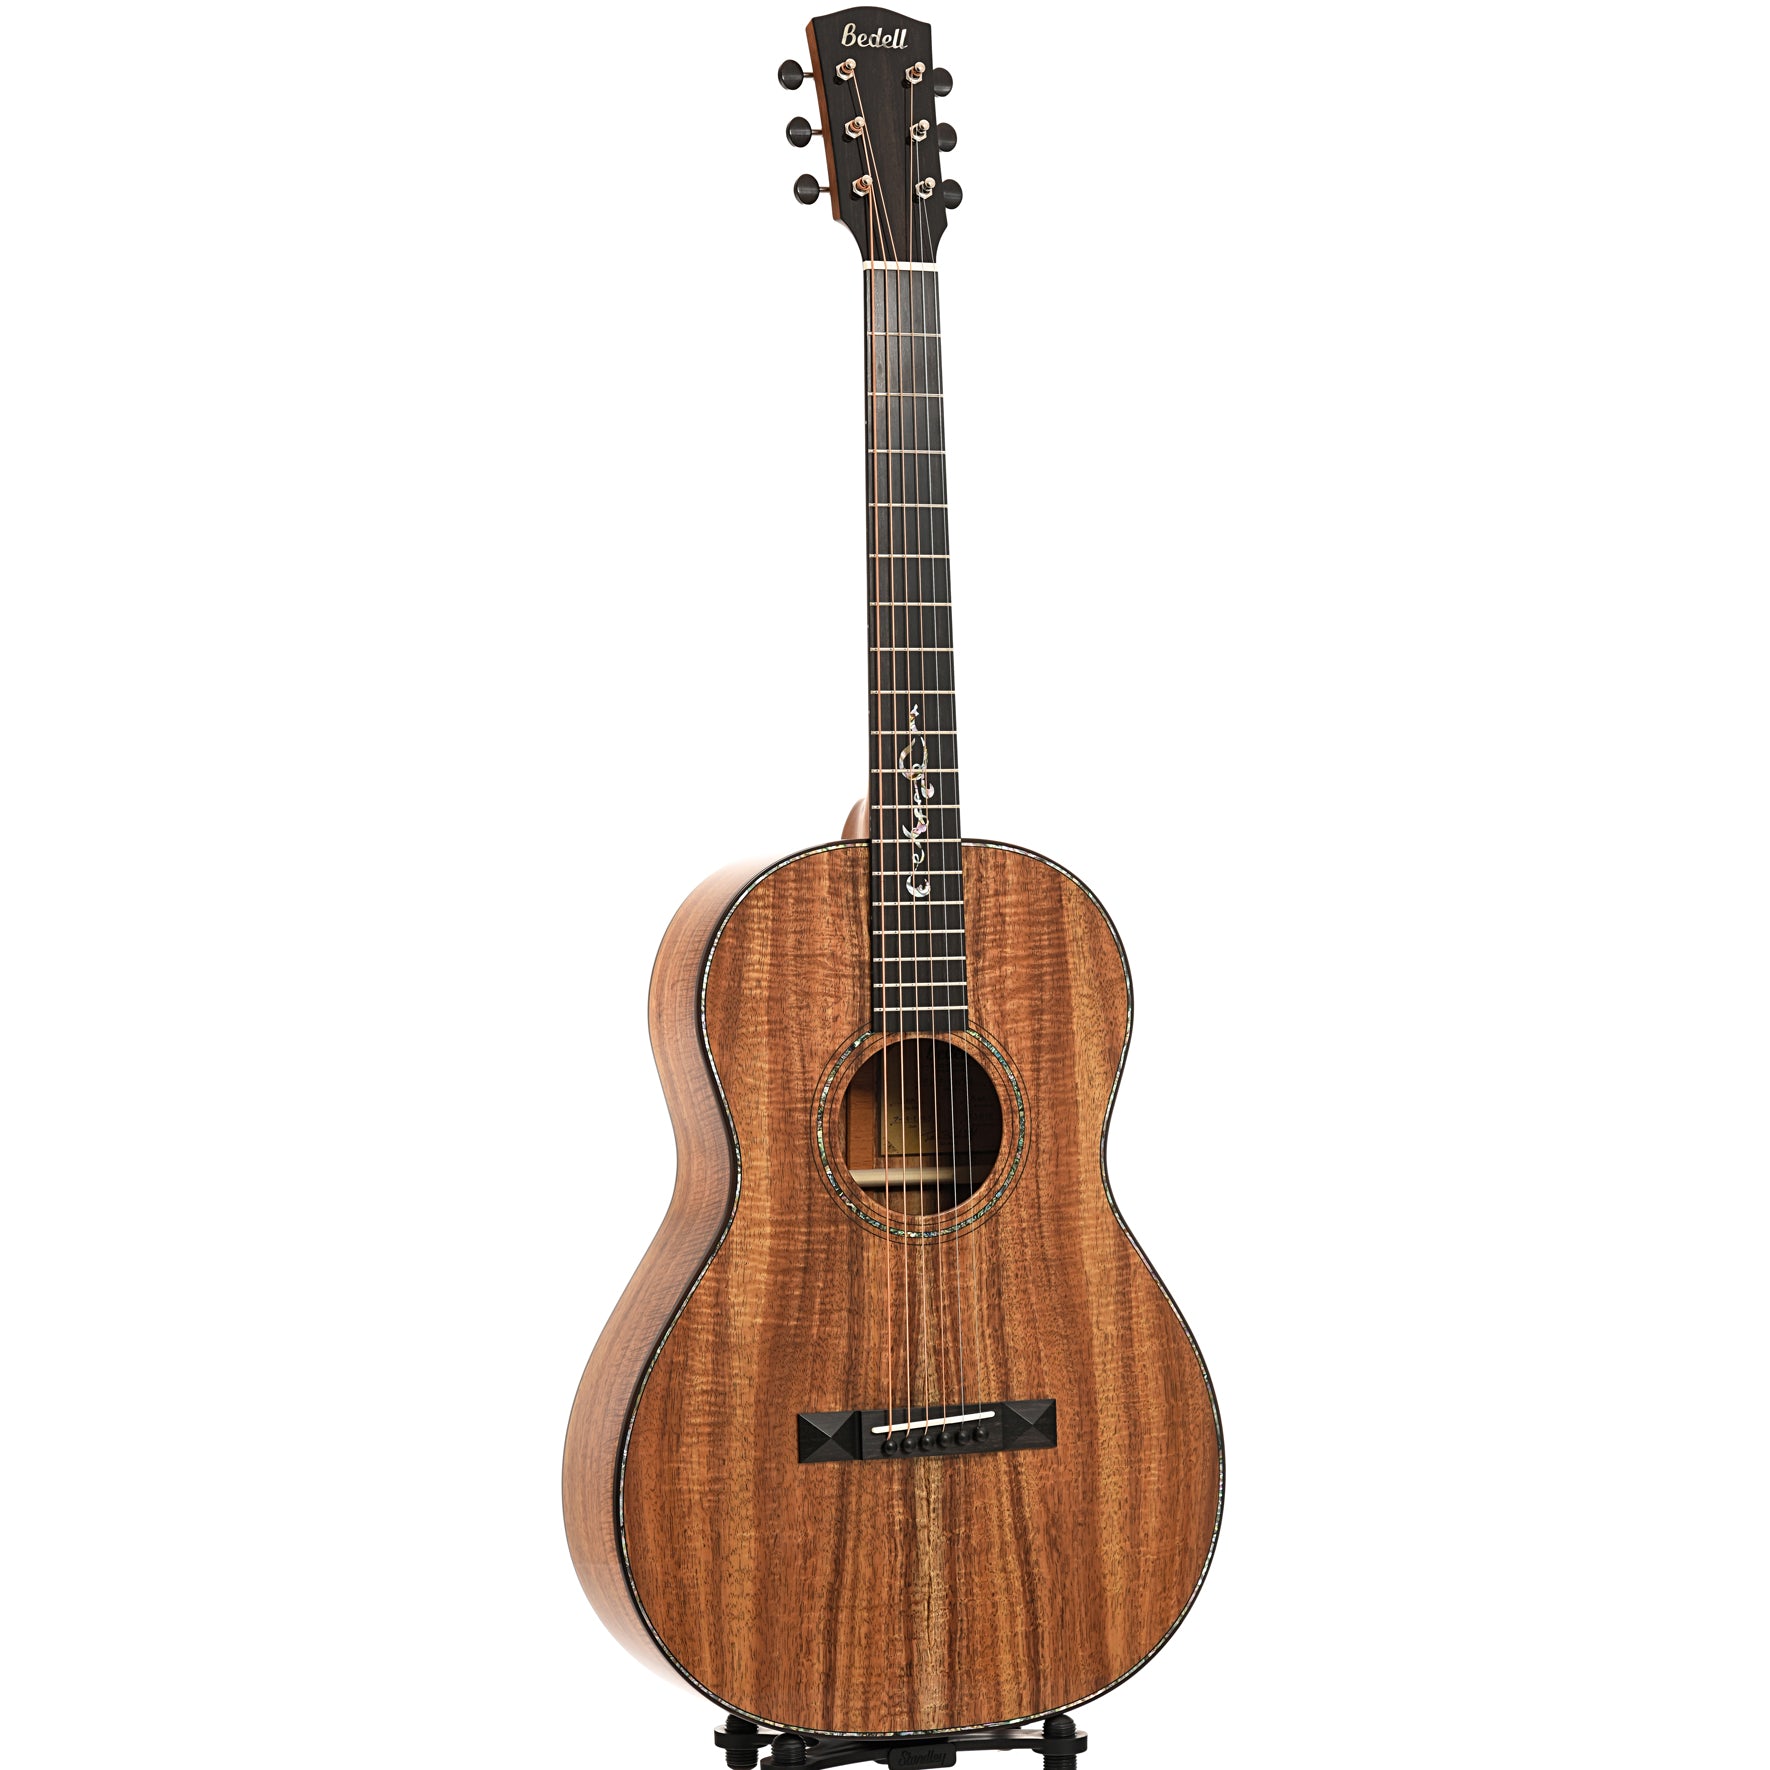 Full front and side of Bedell Limited Edition Fireside Parlor Koa